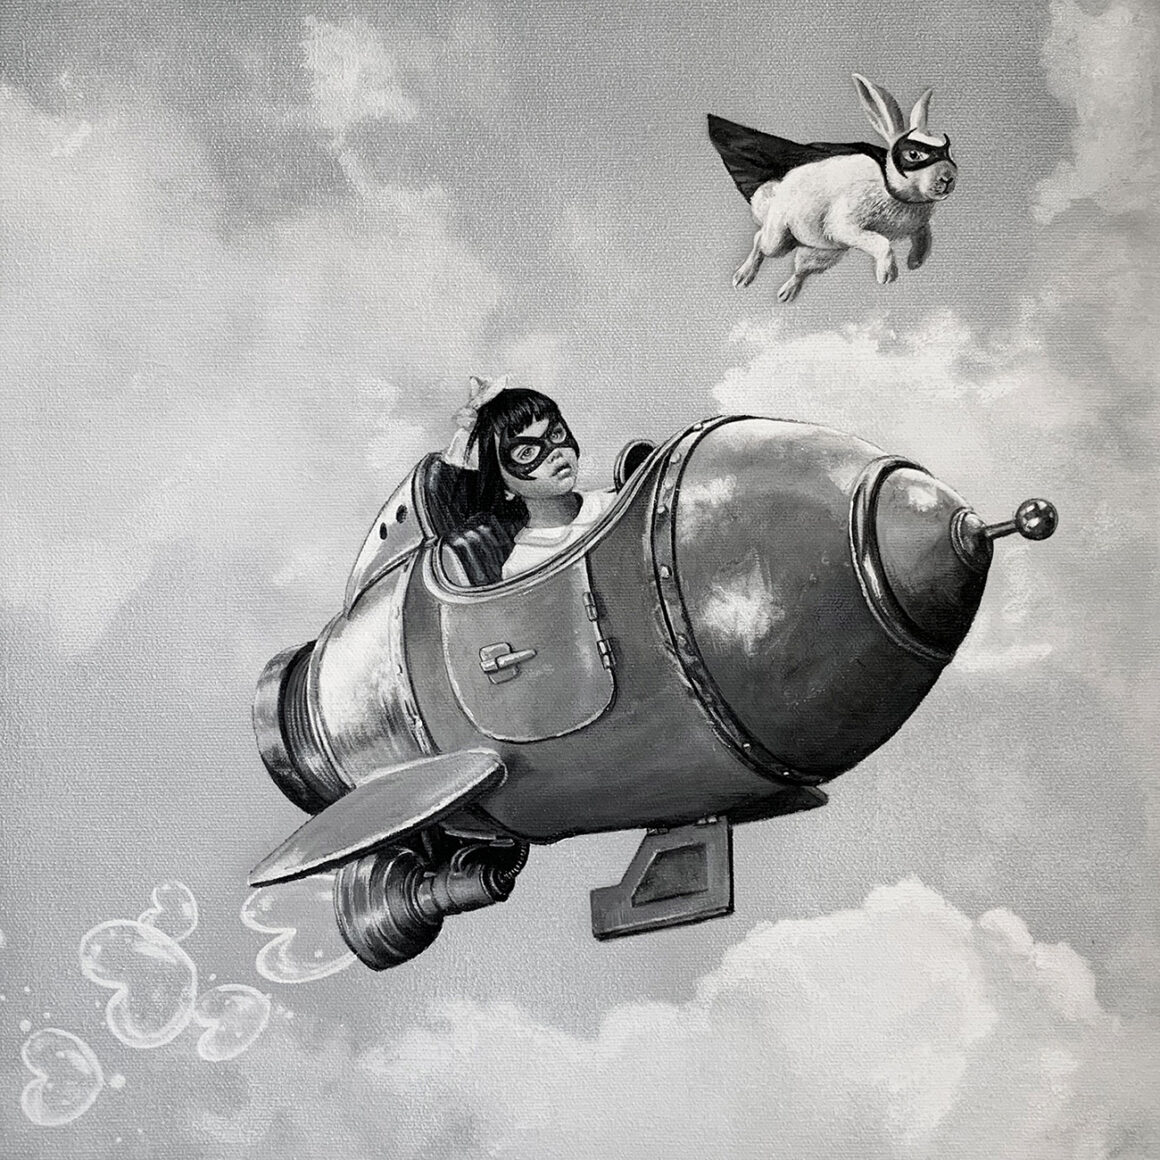 'Girl and Rocket' by Zoe Byland